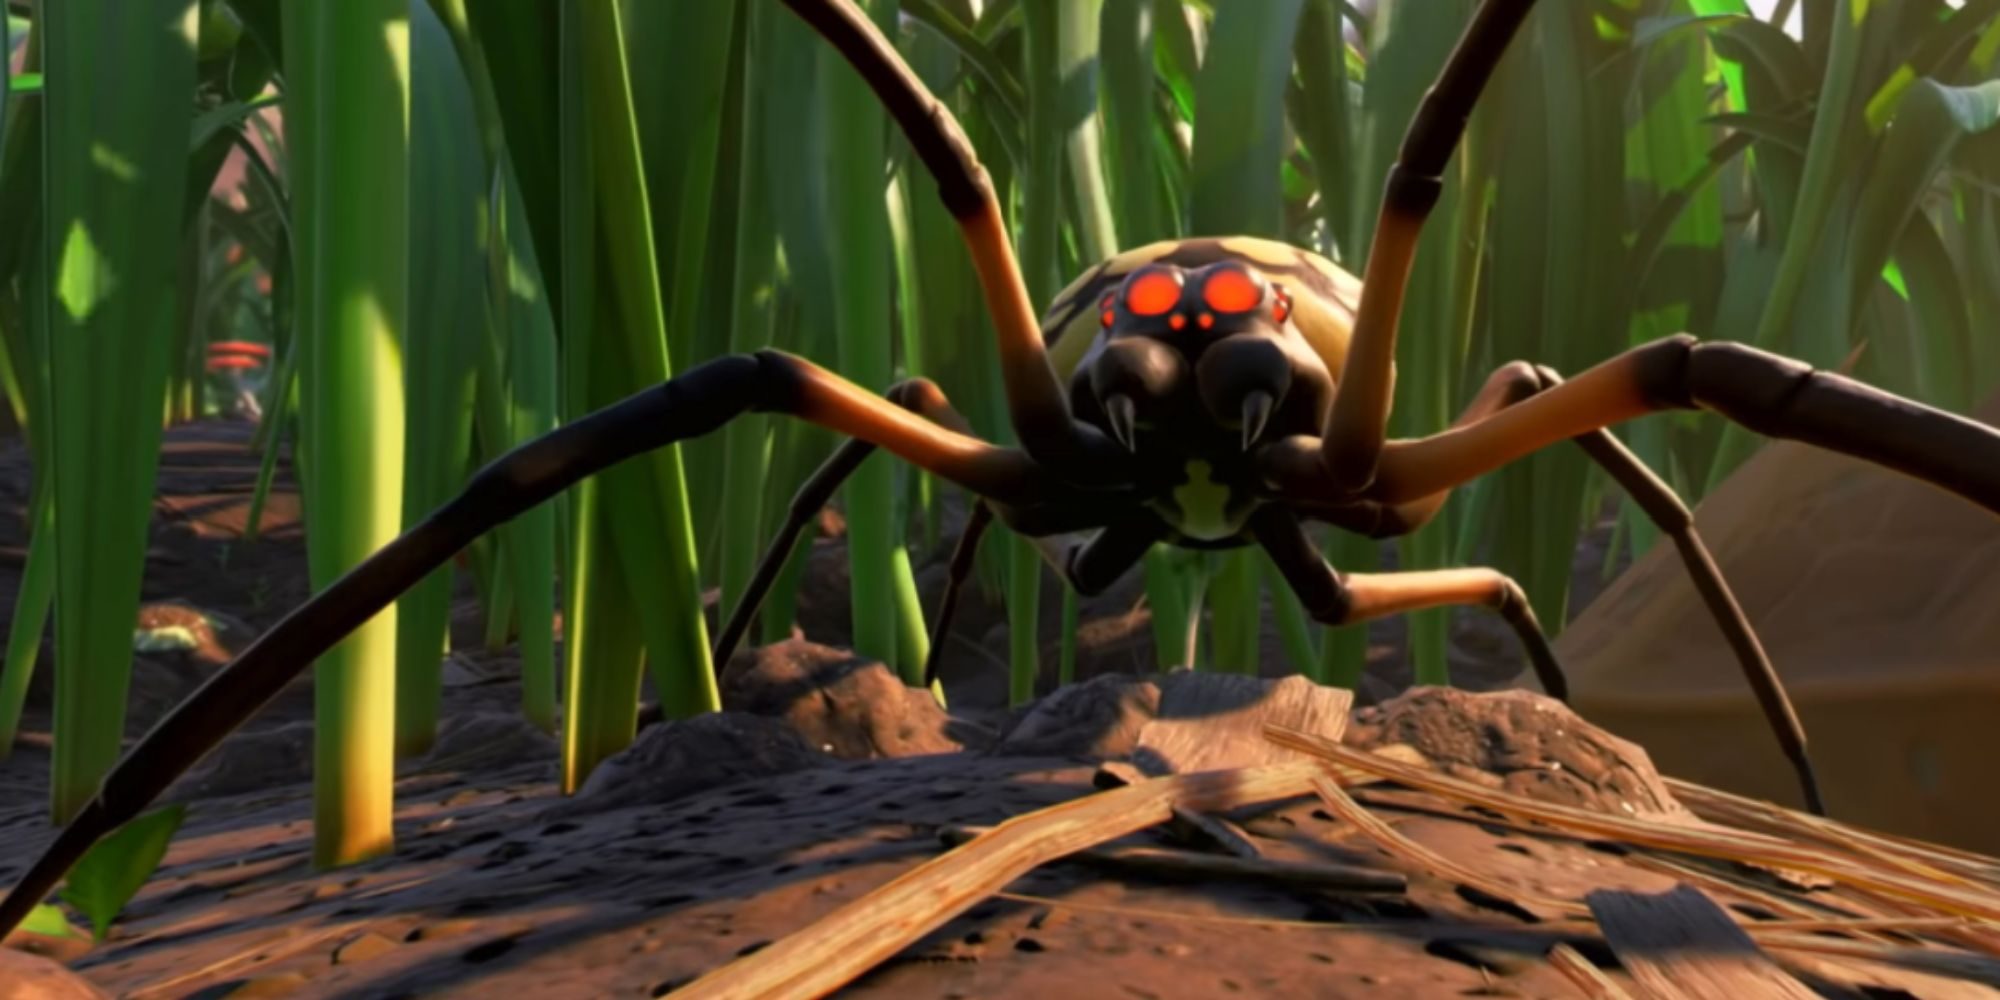 grounded_orb_weaver_spider_enemy-1297483